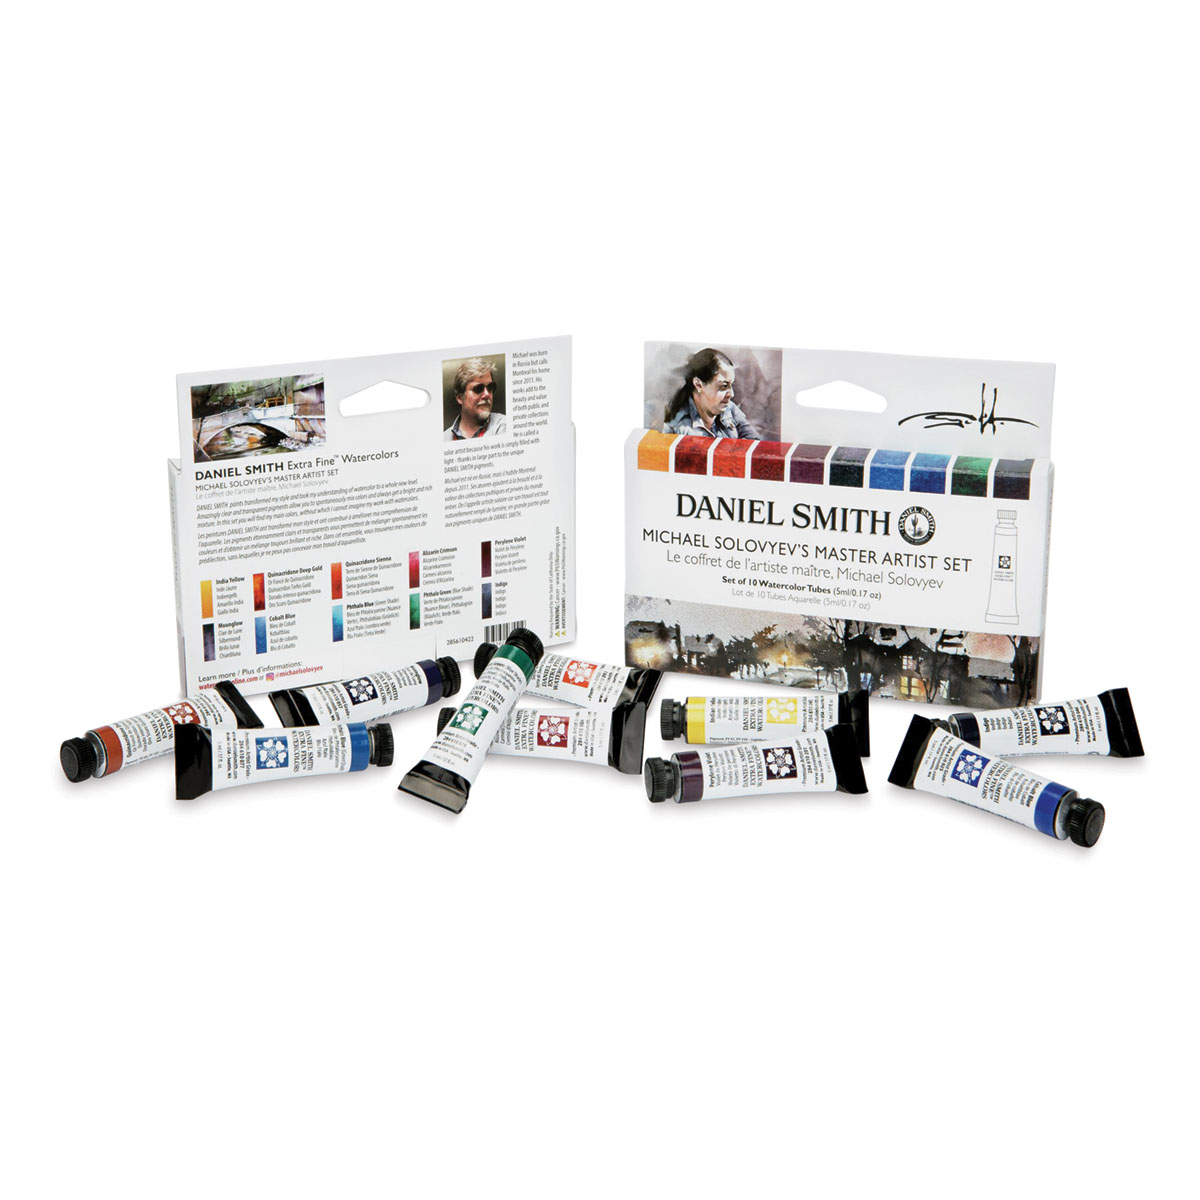 Daniel Smith Watercolor Queen of Color Black 6 Tube 15ml Set - Wet Paint  Artists' Materials and Framing